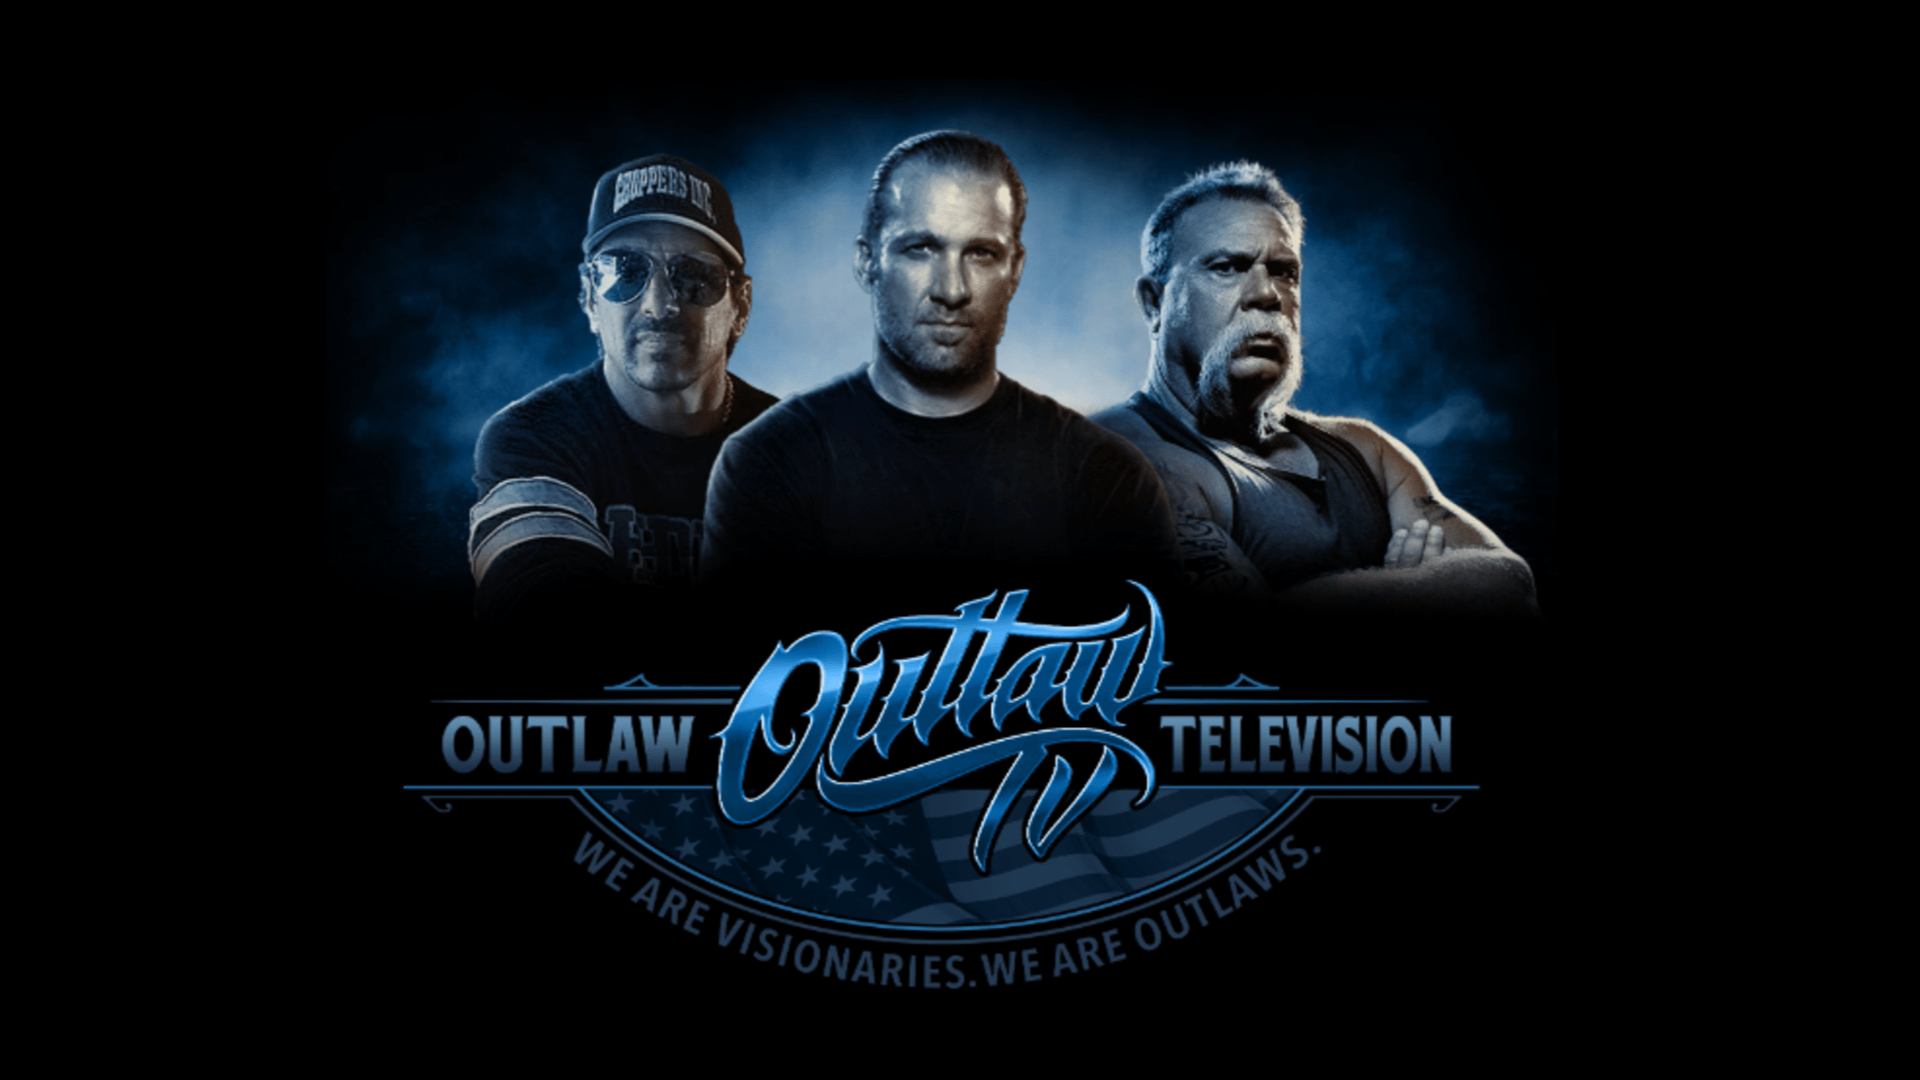 Outlaw TV cast